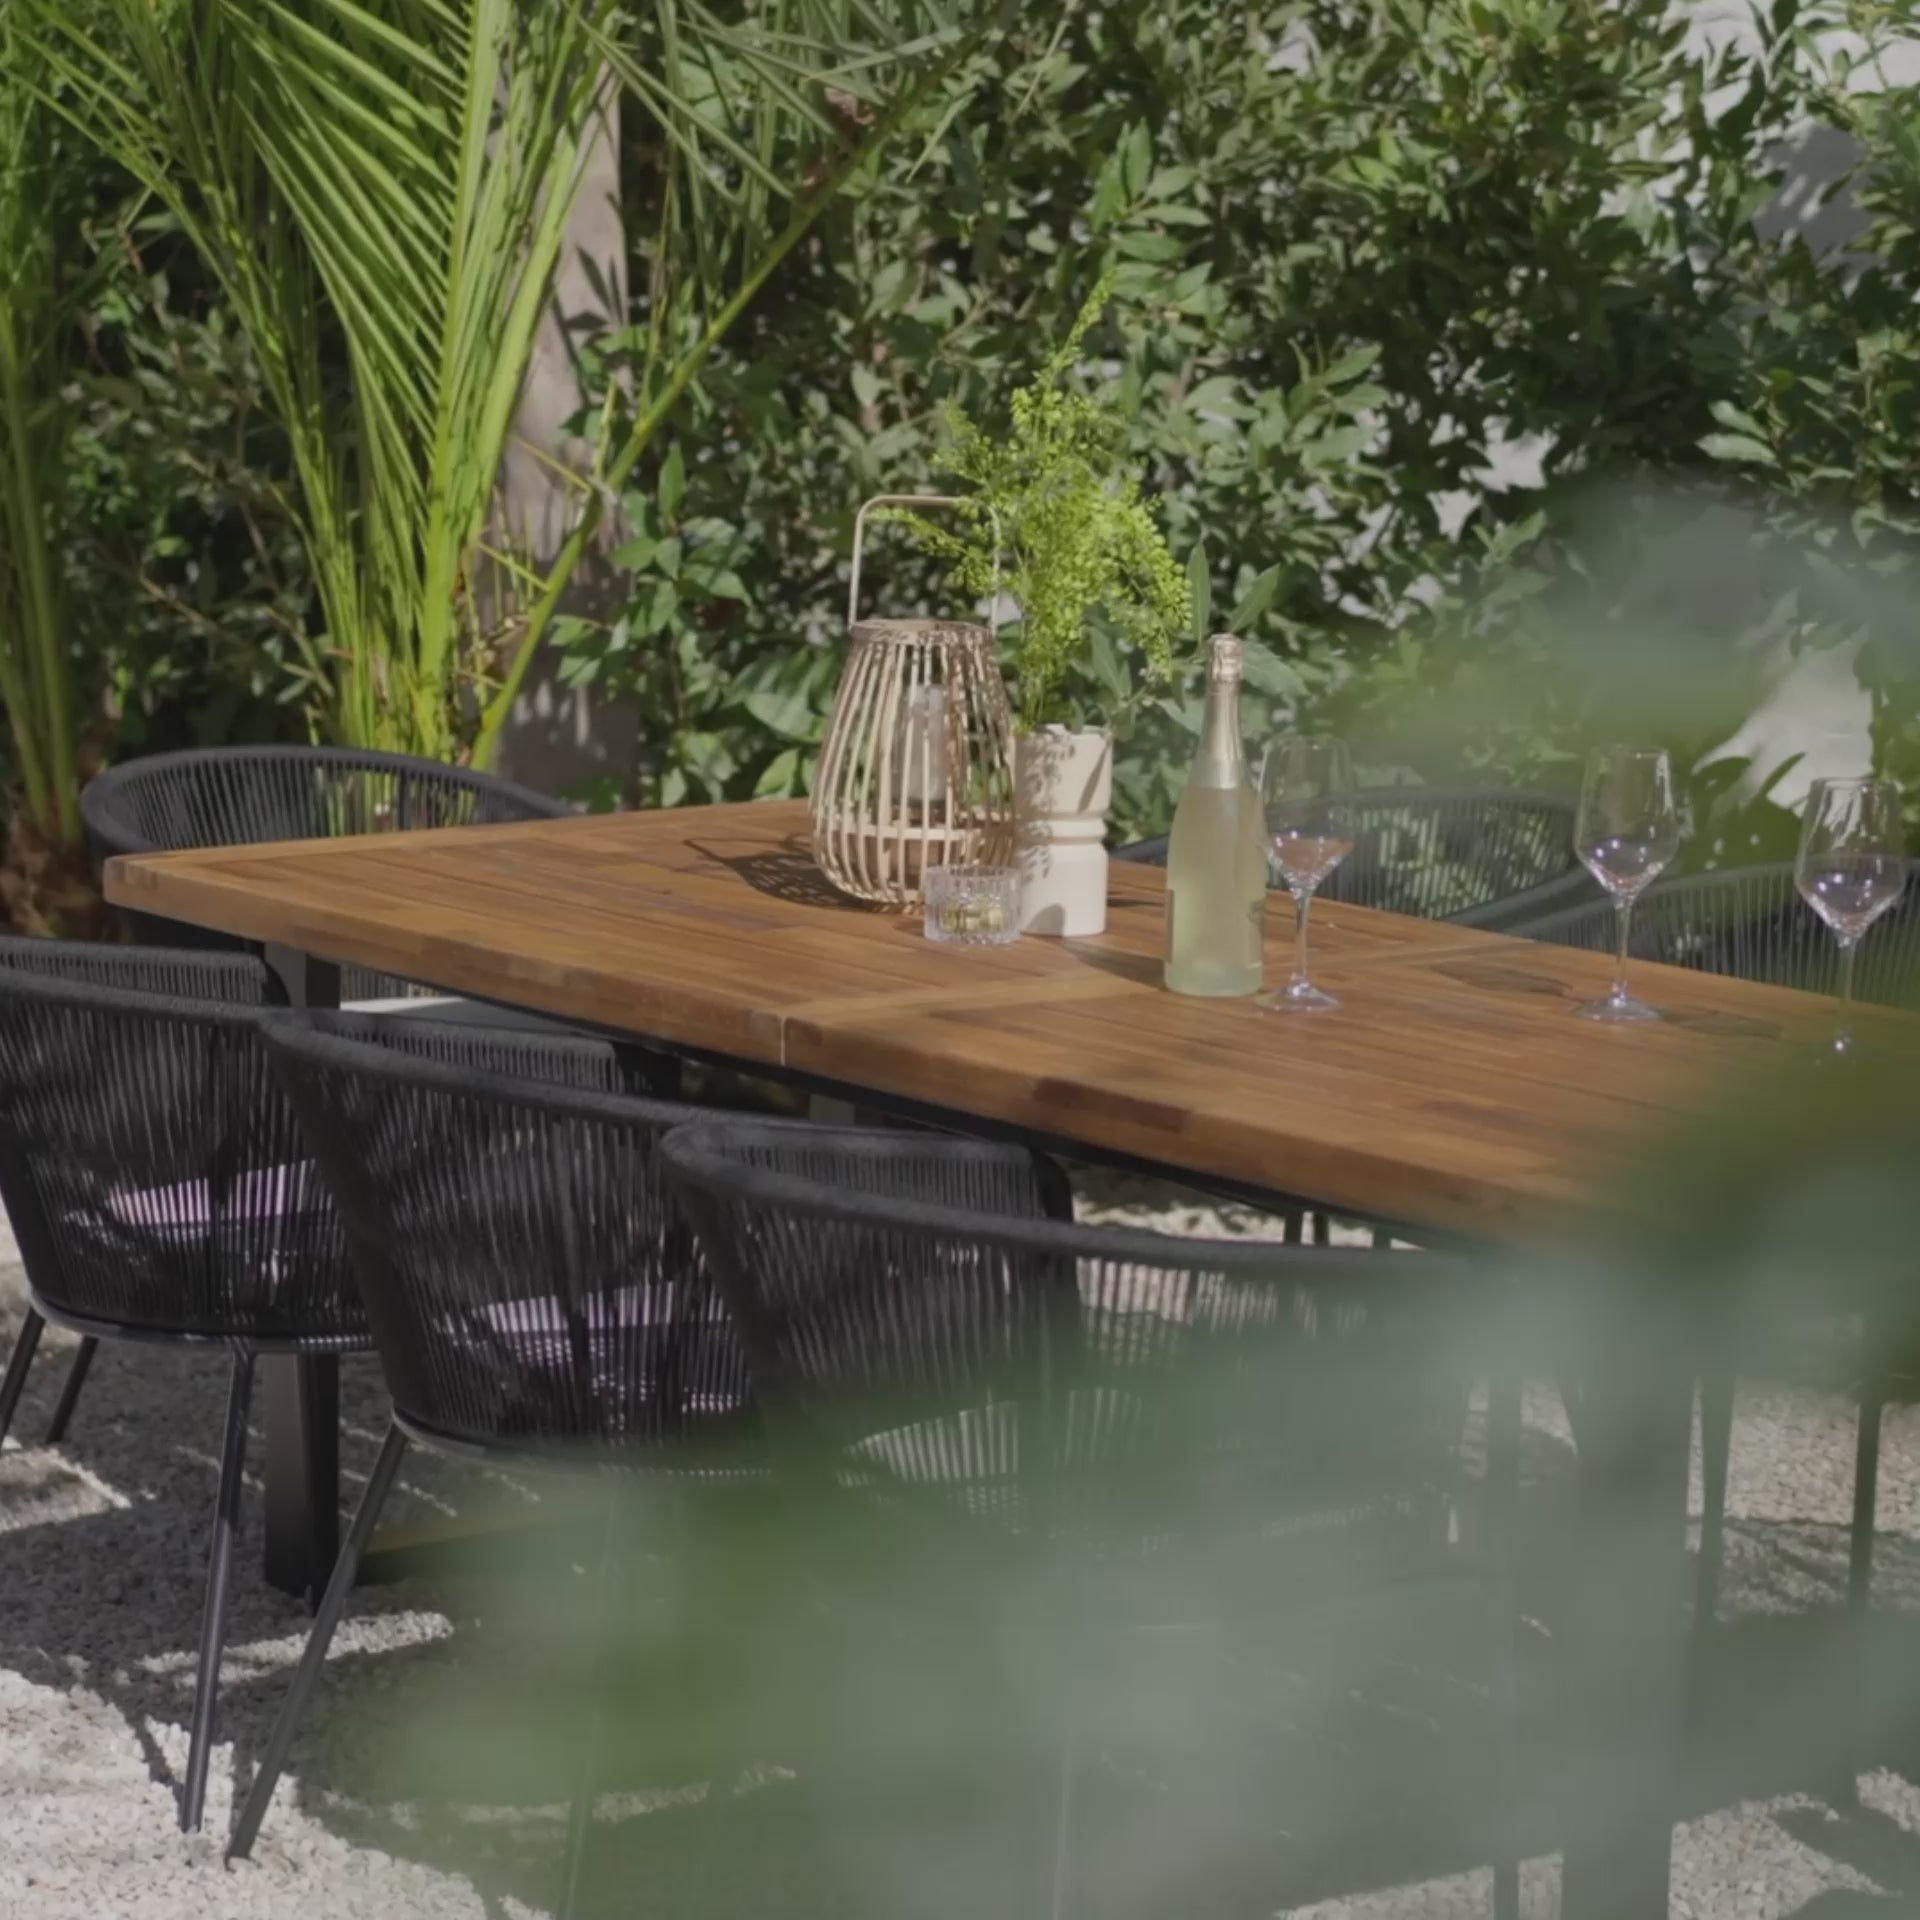 Hali 8 Seater Wooden Outdoor Dining Set with Hali Black Chairs - 235cm - Laura James